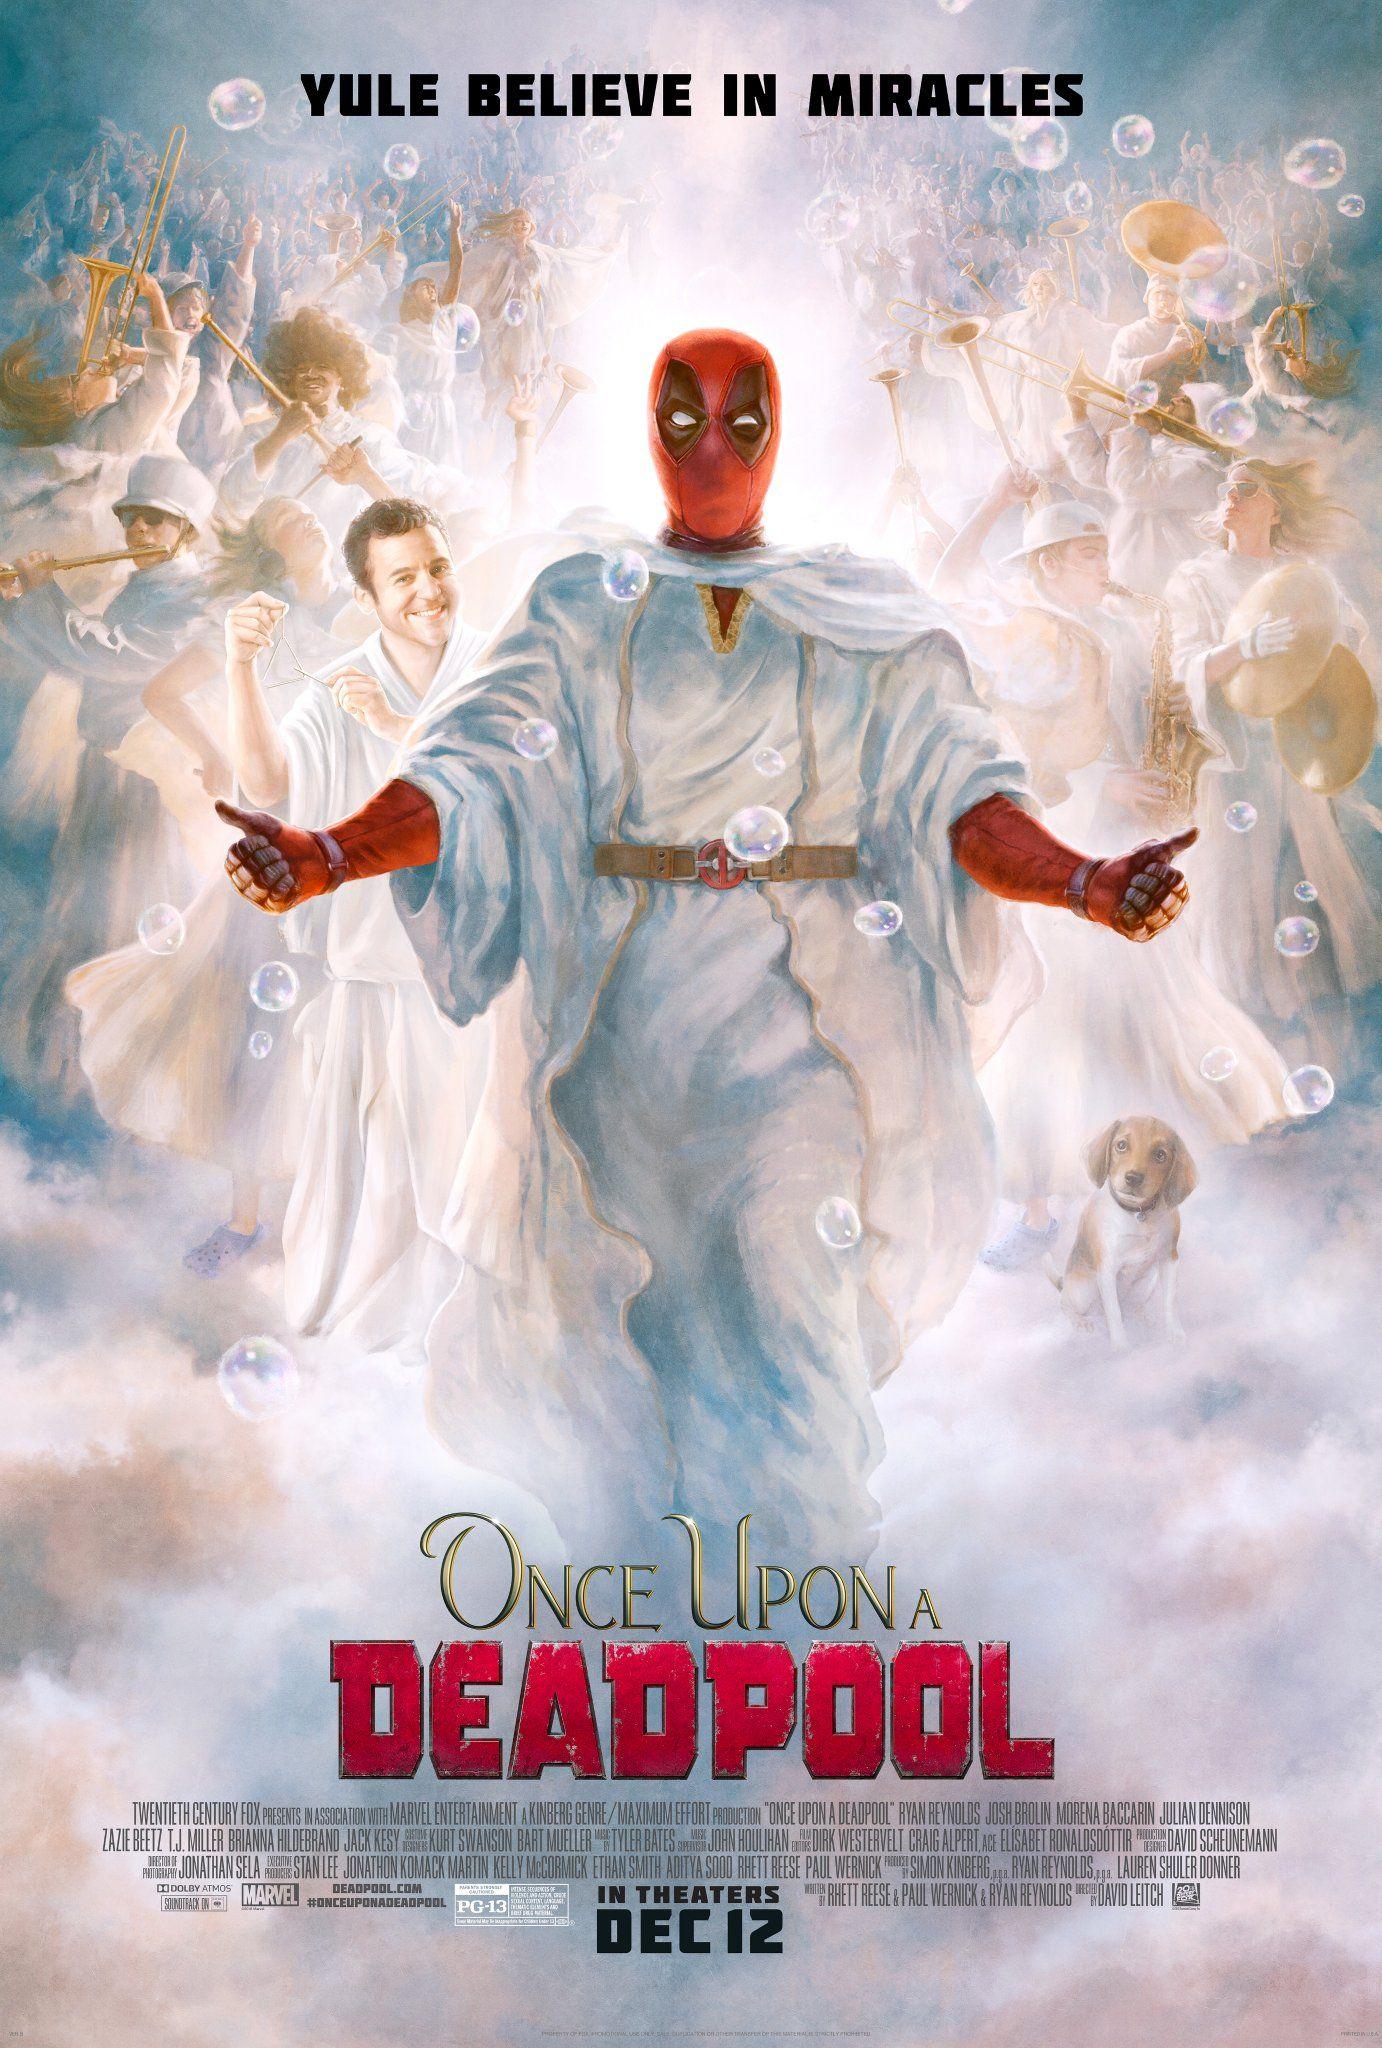 Heavenly New ONCE UPON A DEADPOOL Poster Promises Yule Believe